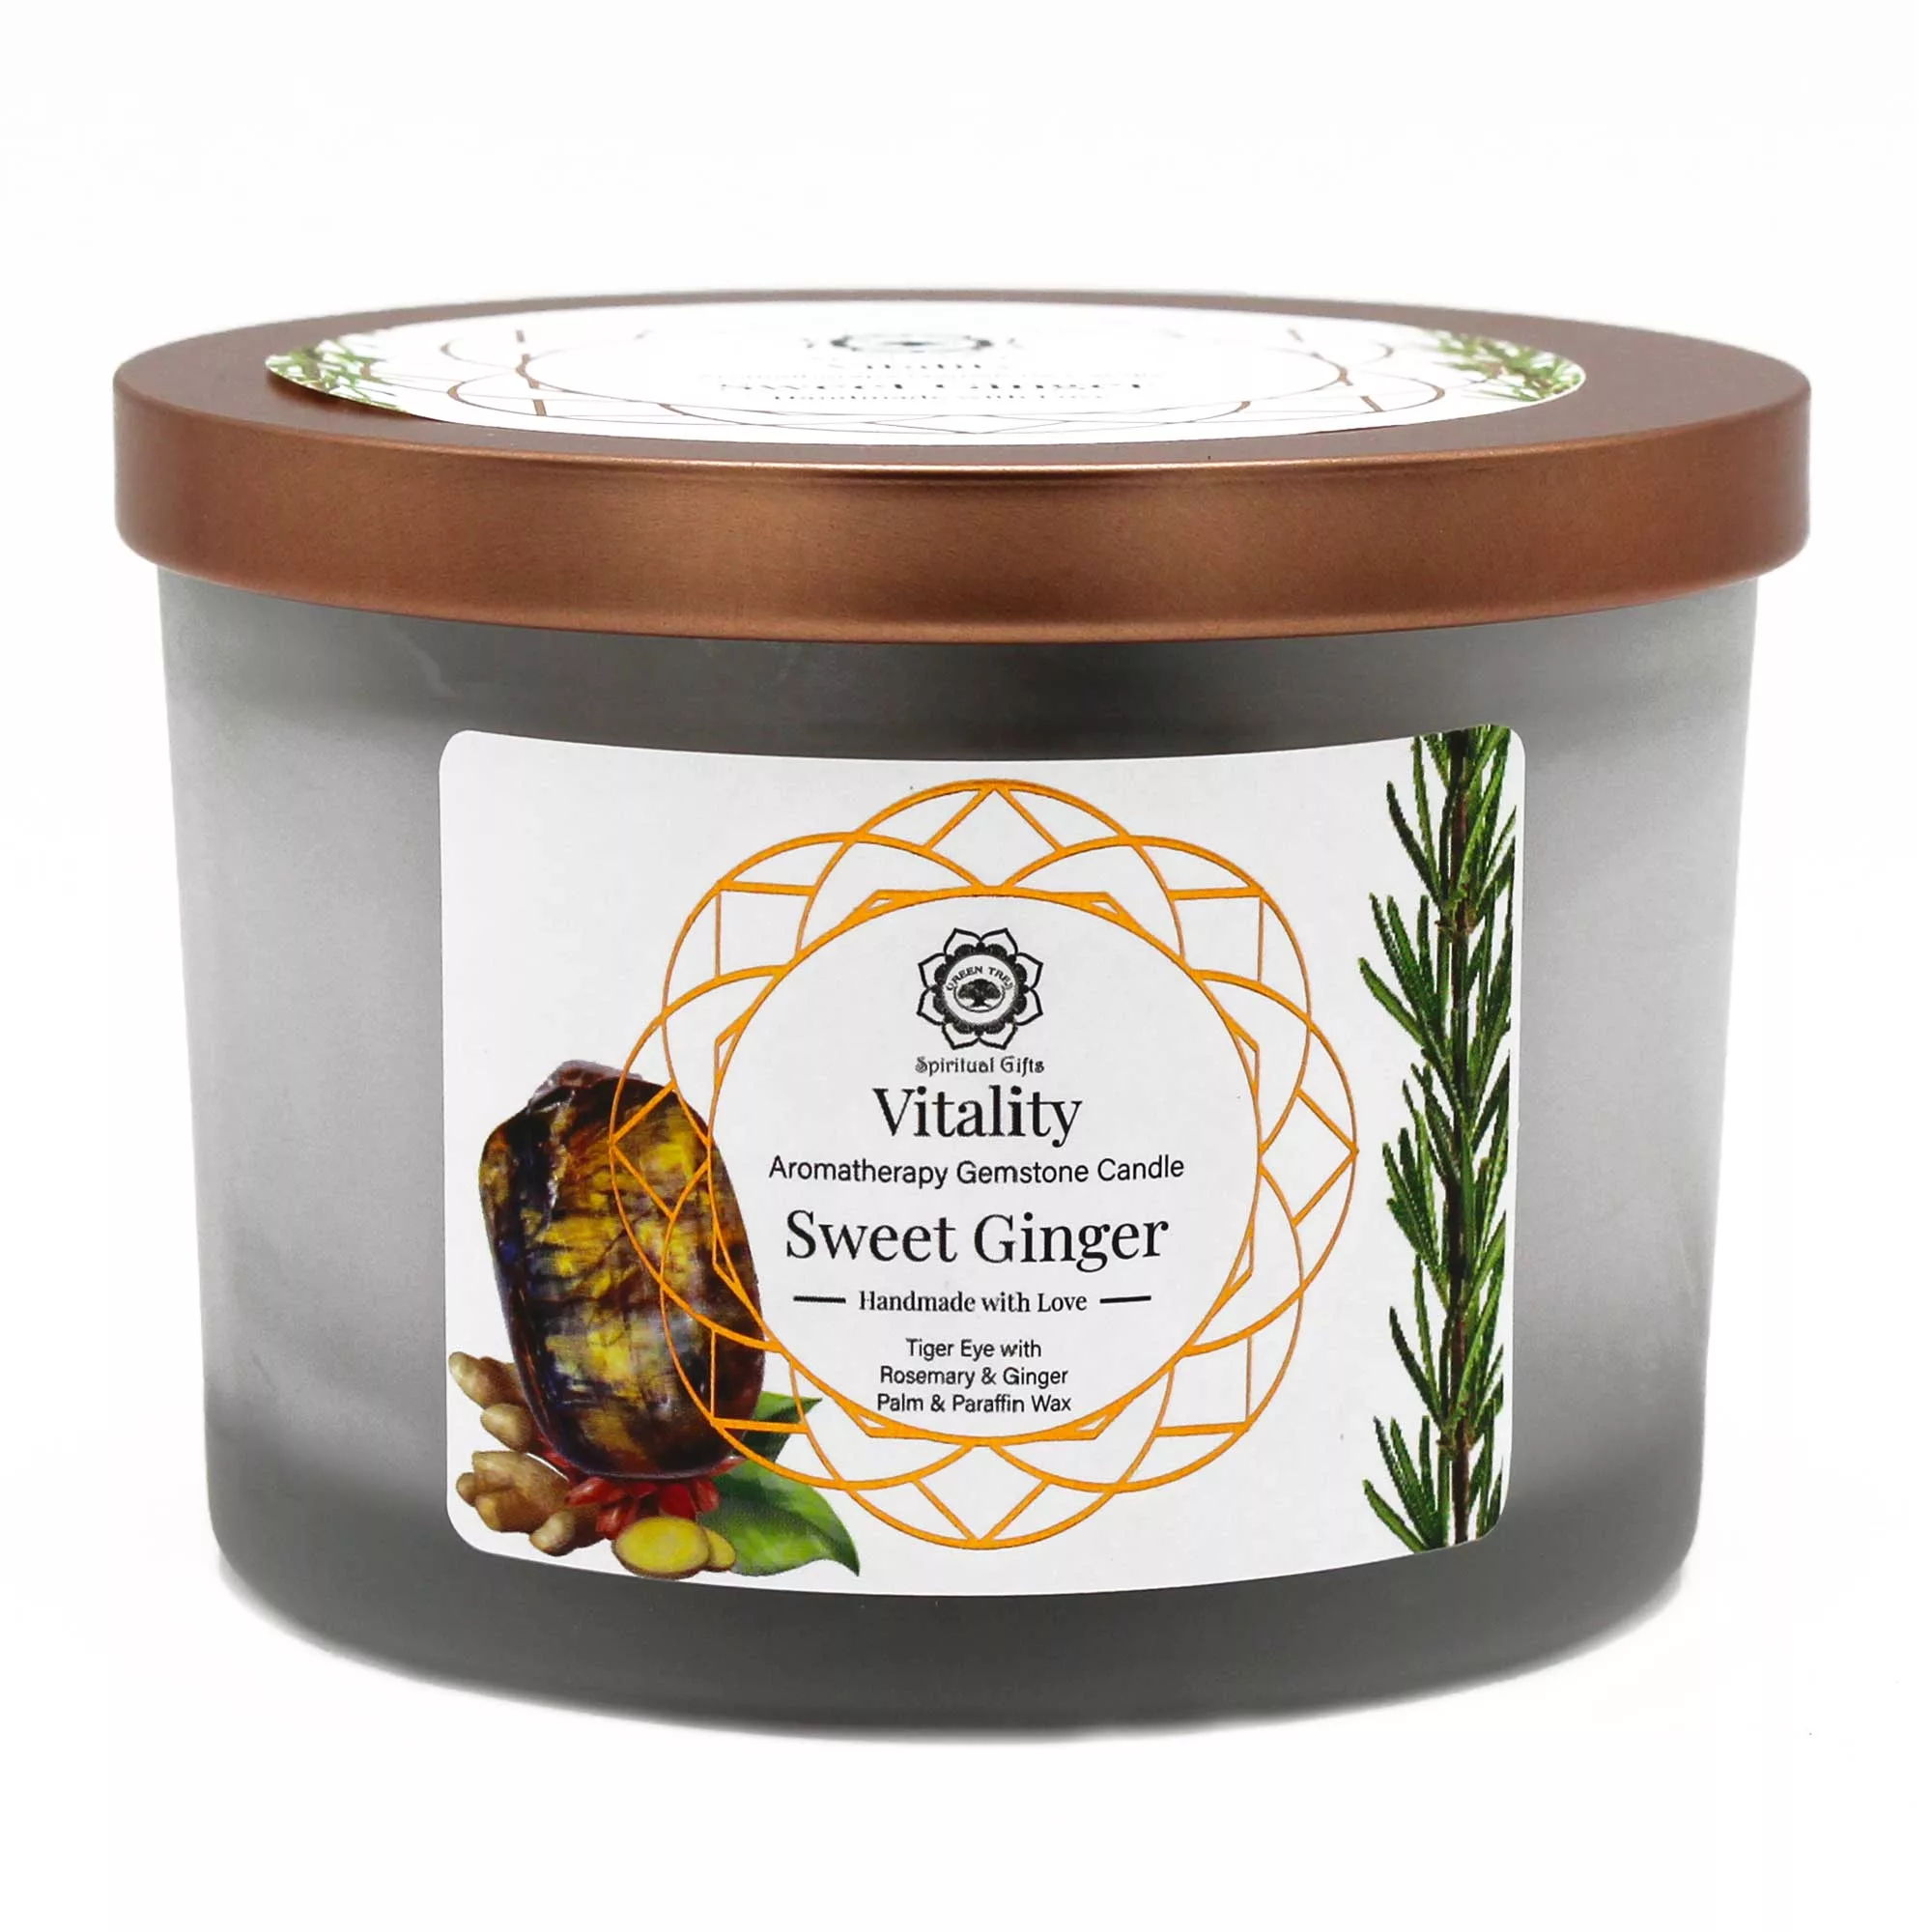 Sweet Ginger and Tiger Eye Gemstone Candle – Viality